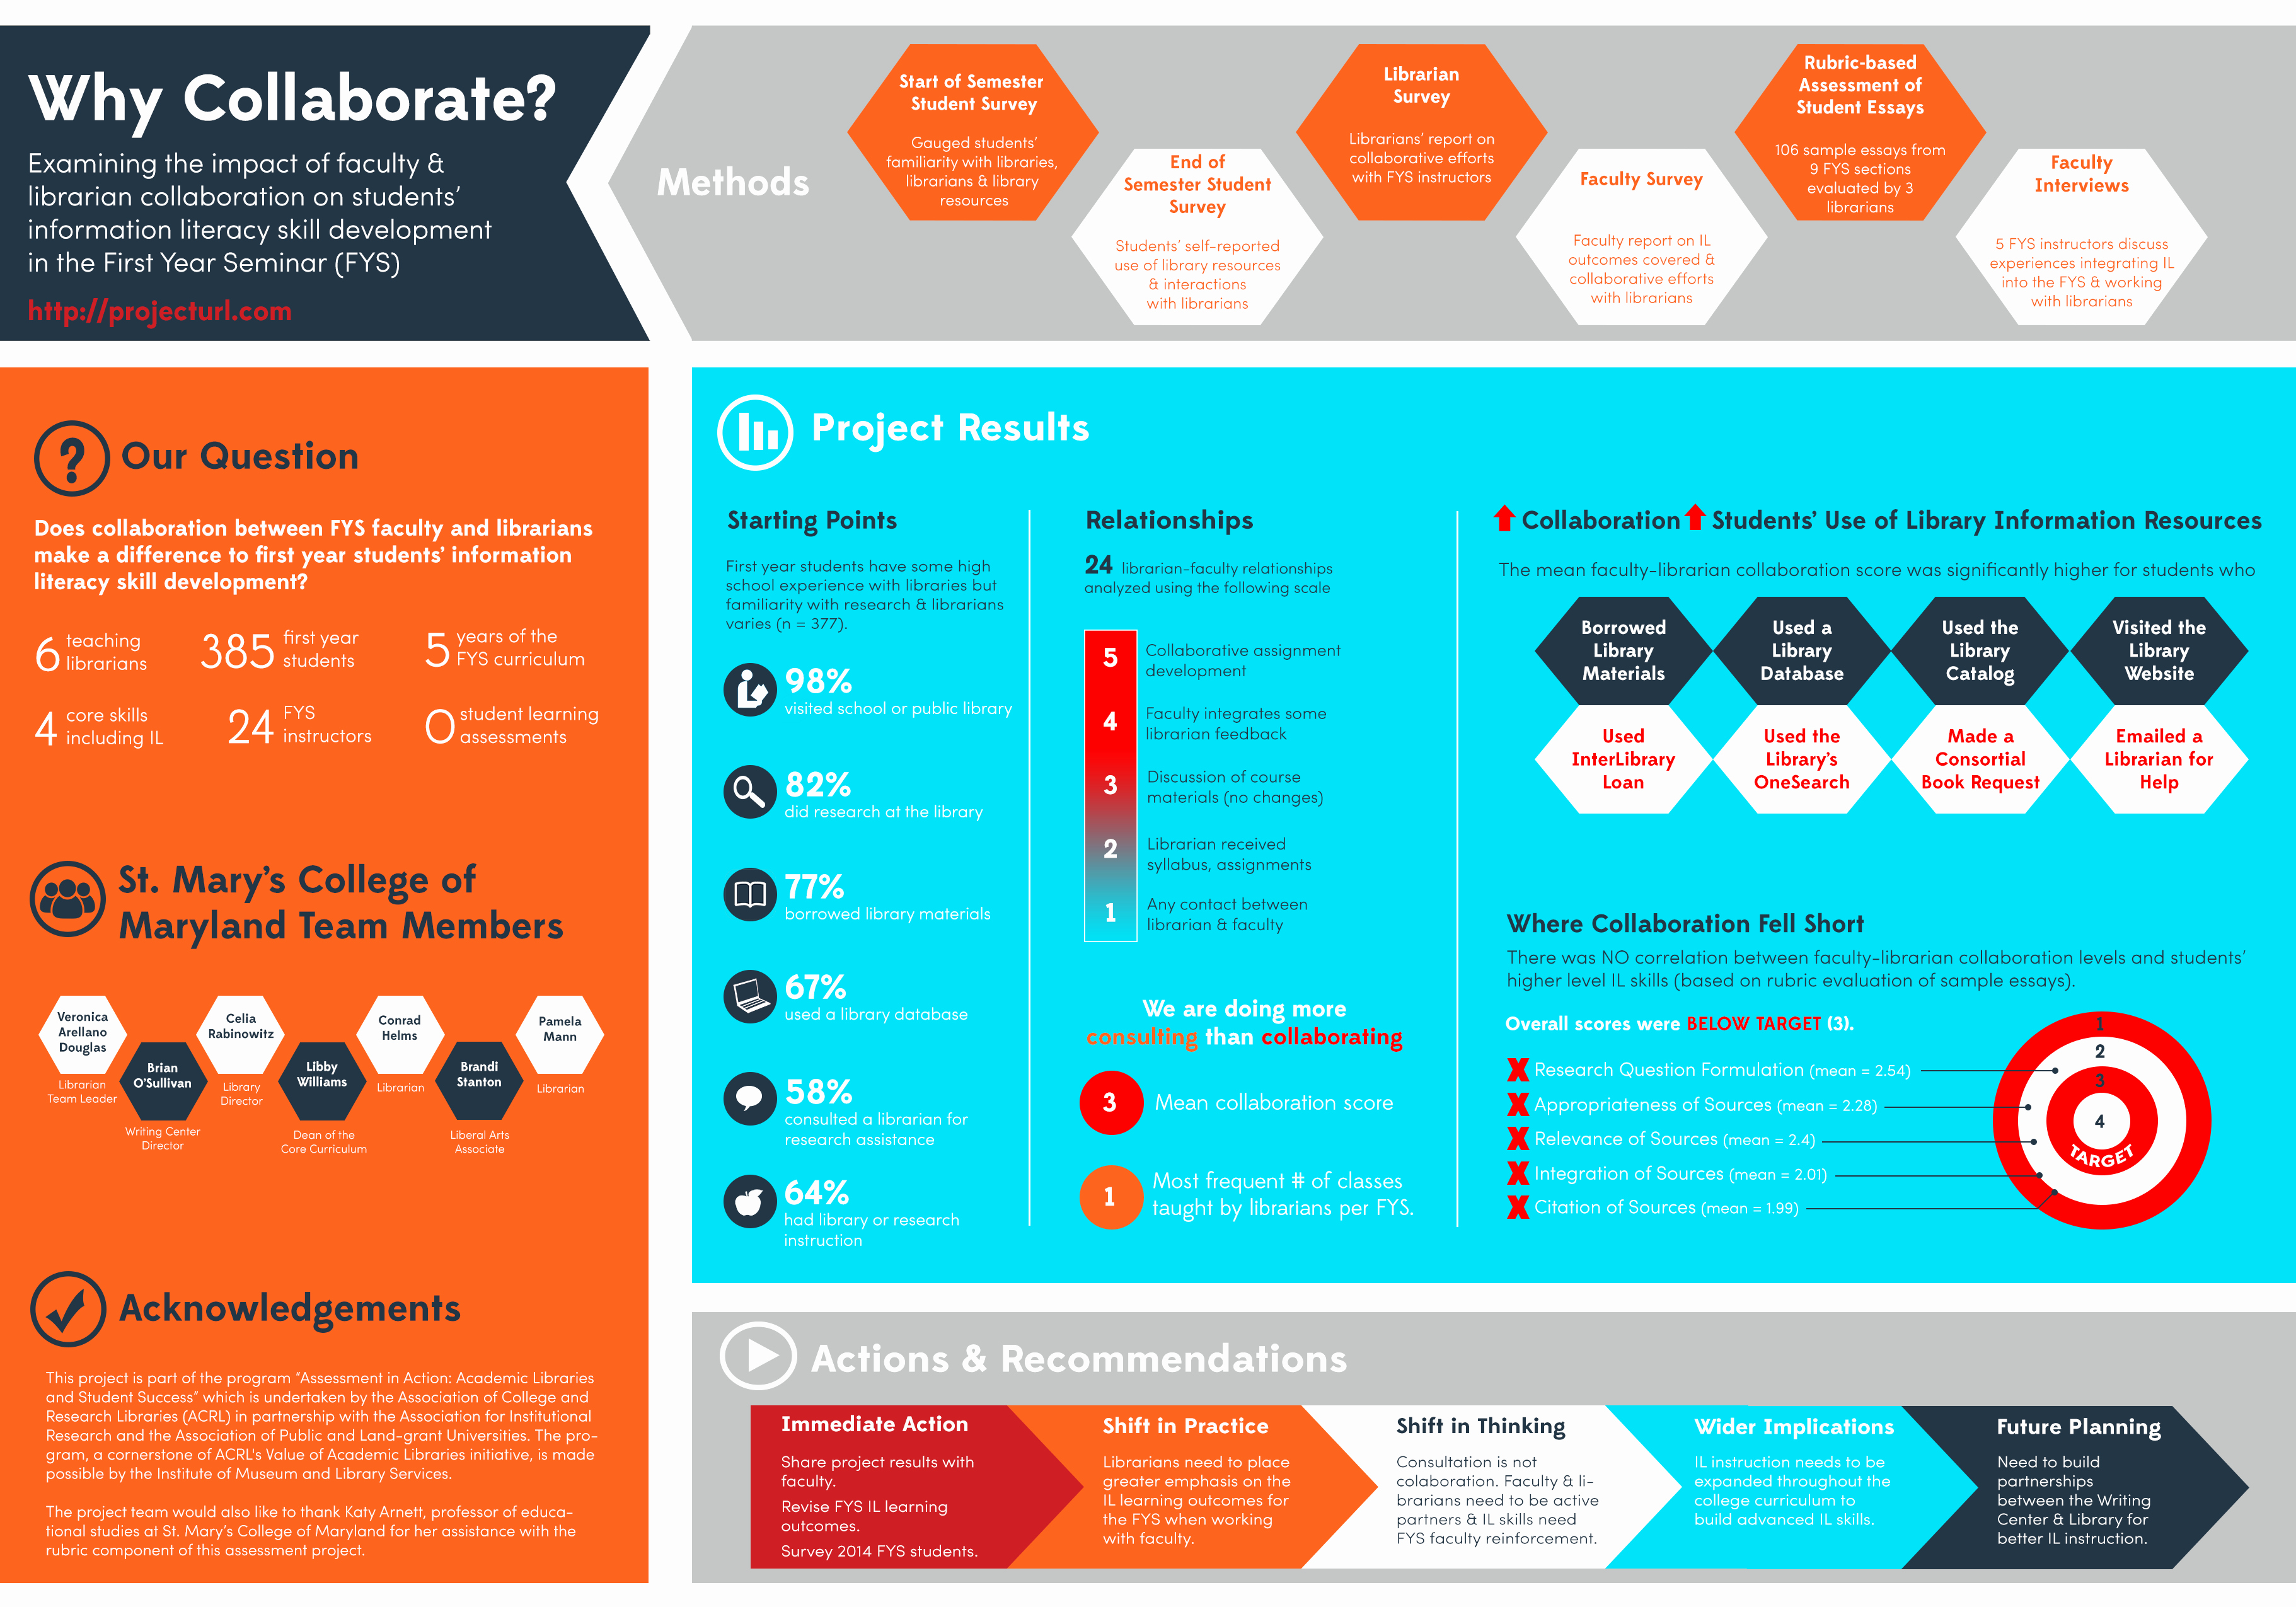 Powerpoint Research Poster Template New Updated Design to A Scientific Poster Looks Like An